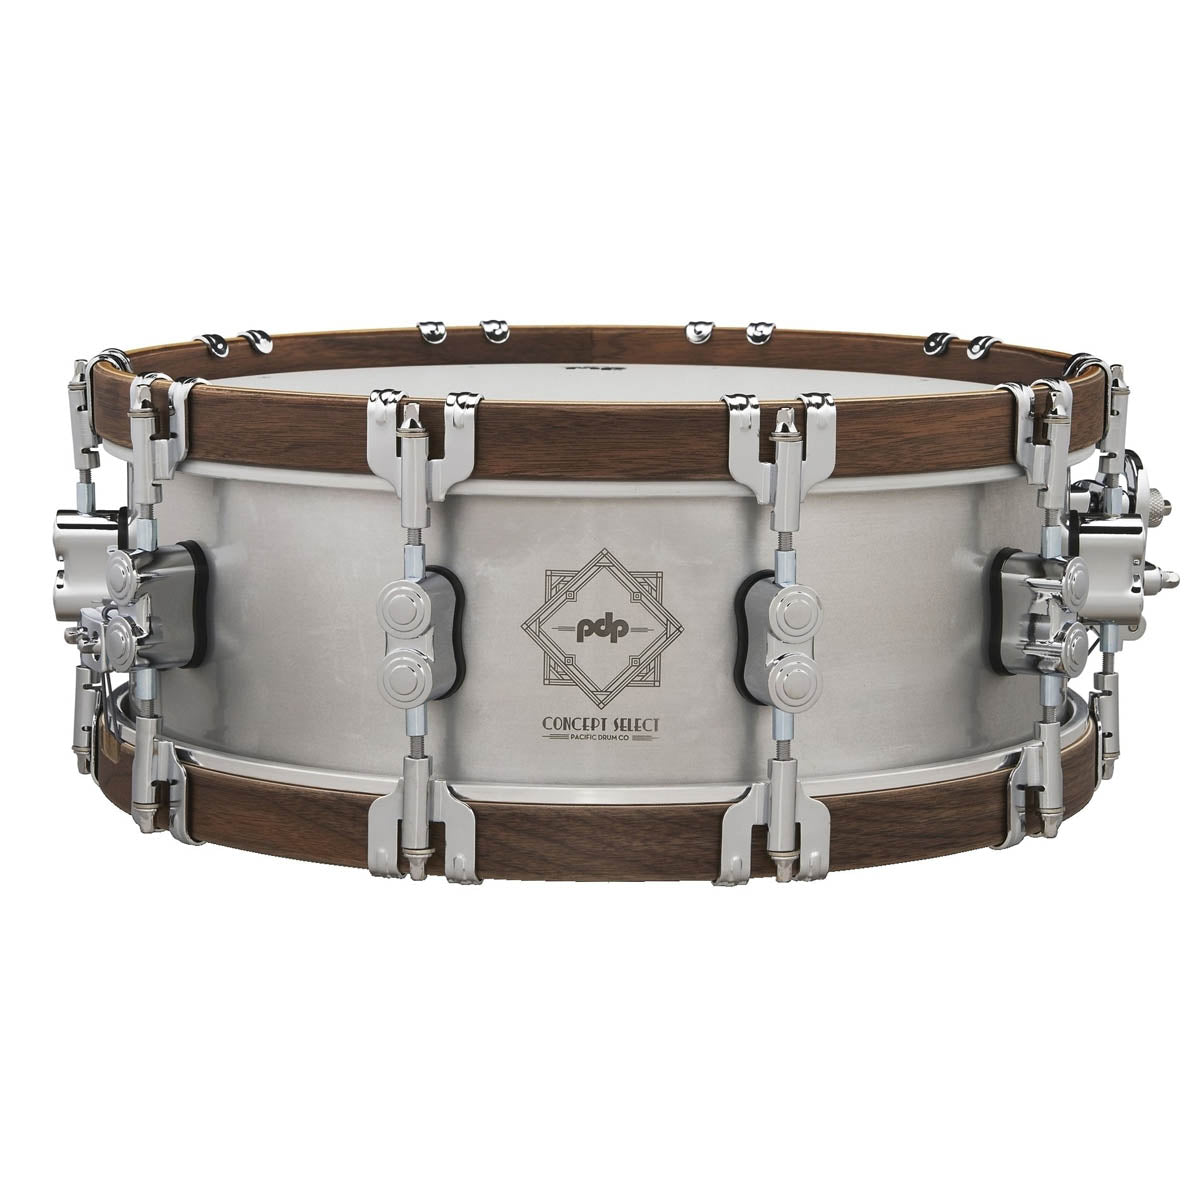 PDP by DW Concept Select 14"x5" Aluminium Snare Drum with Wood Hoops